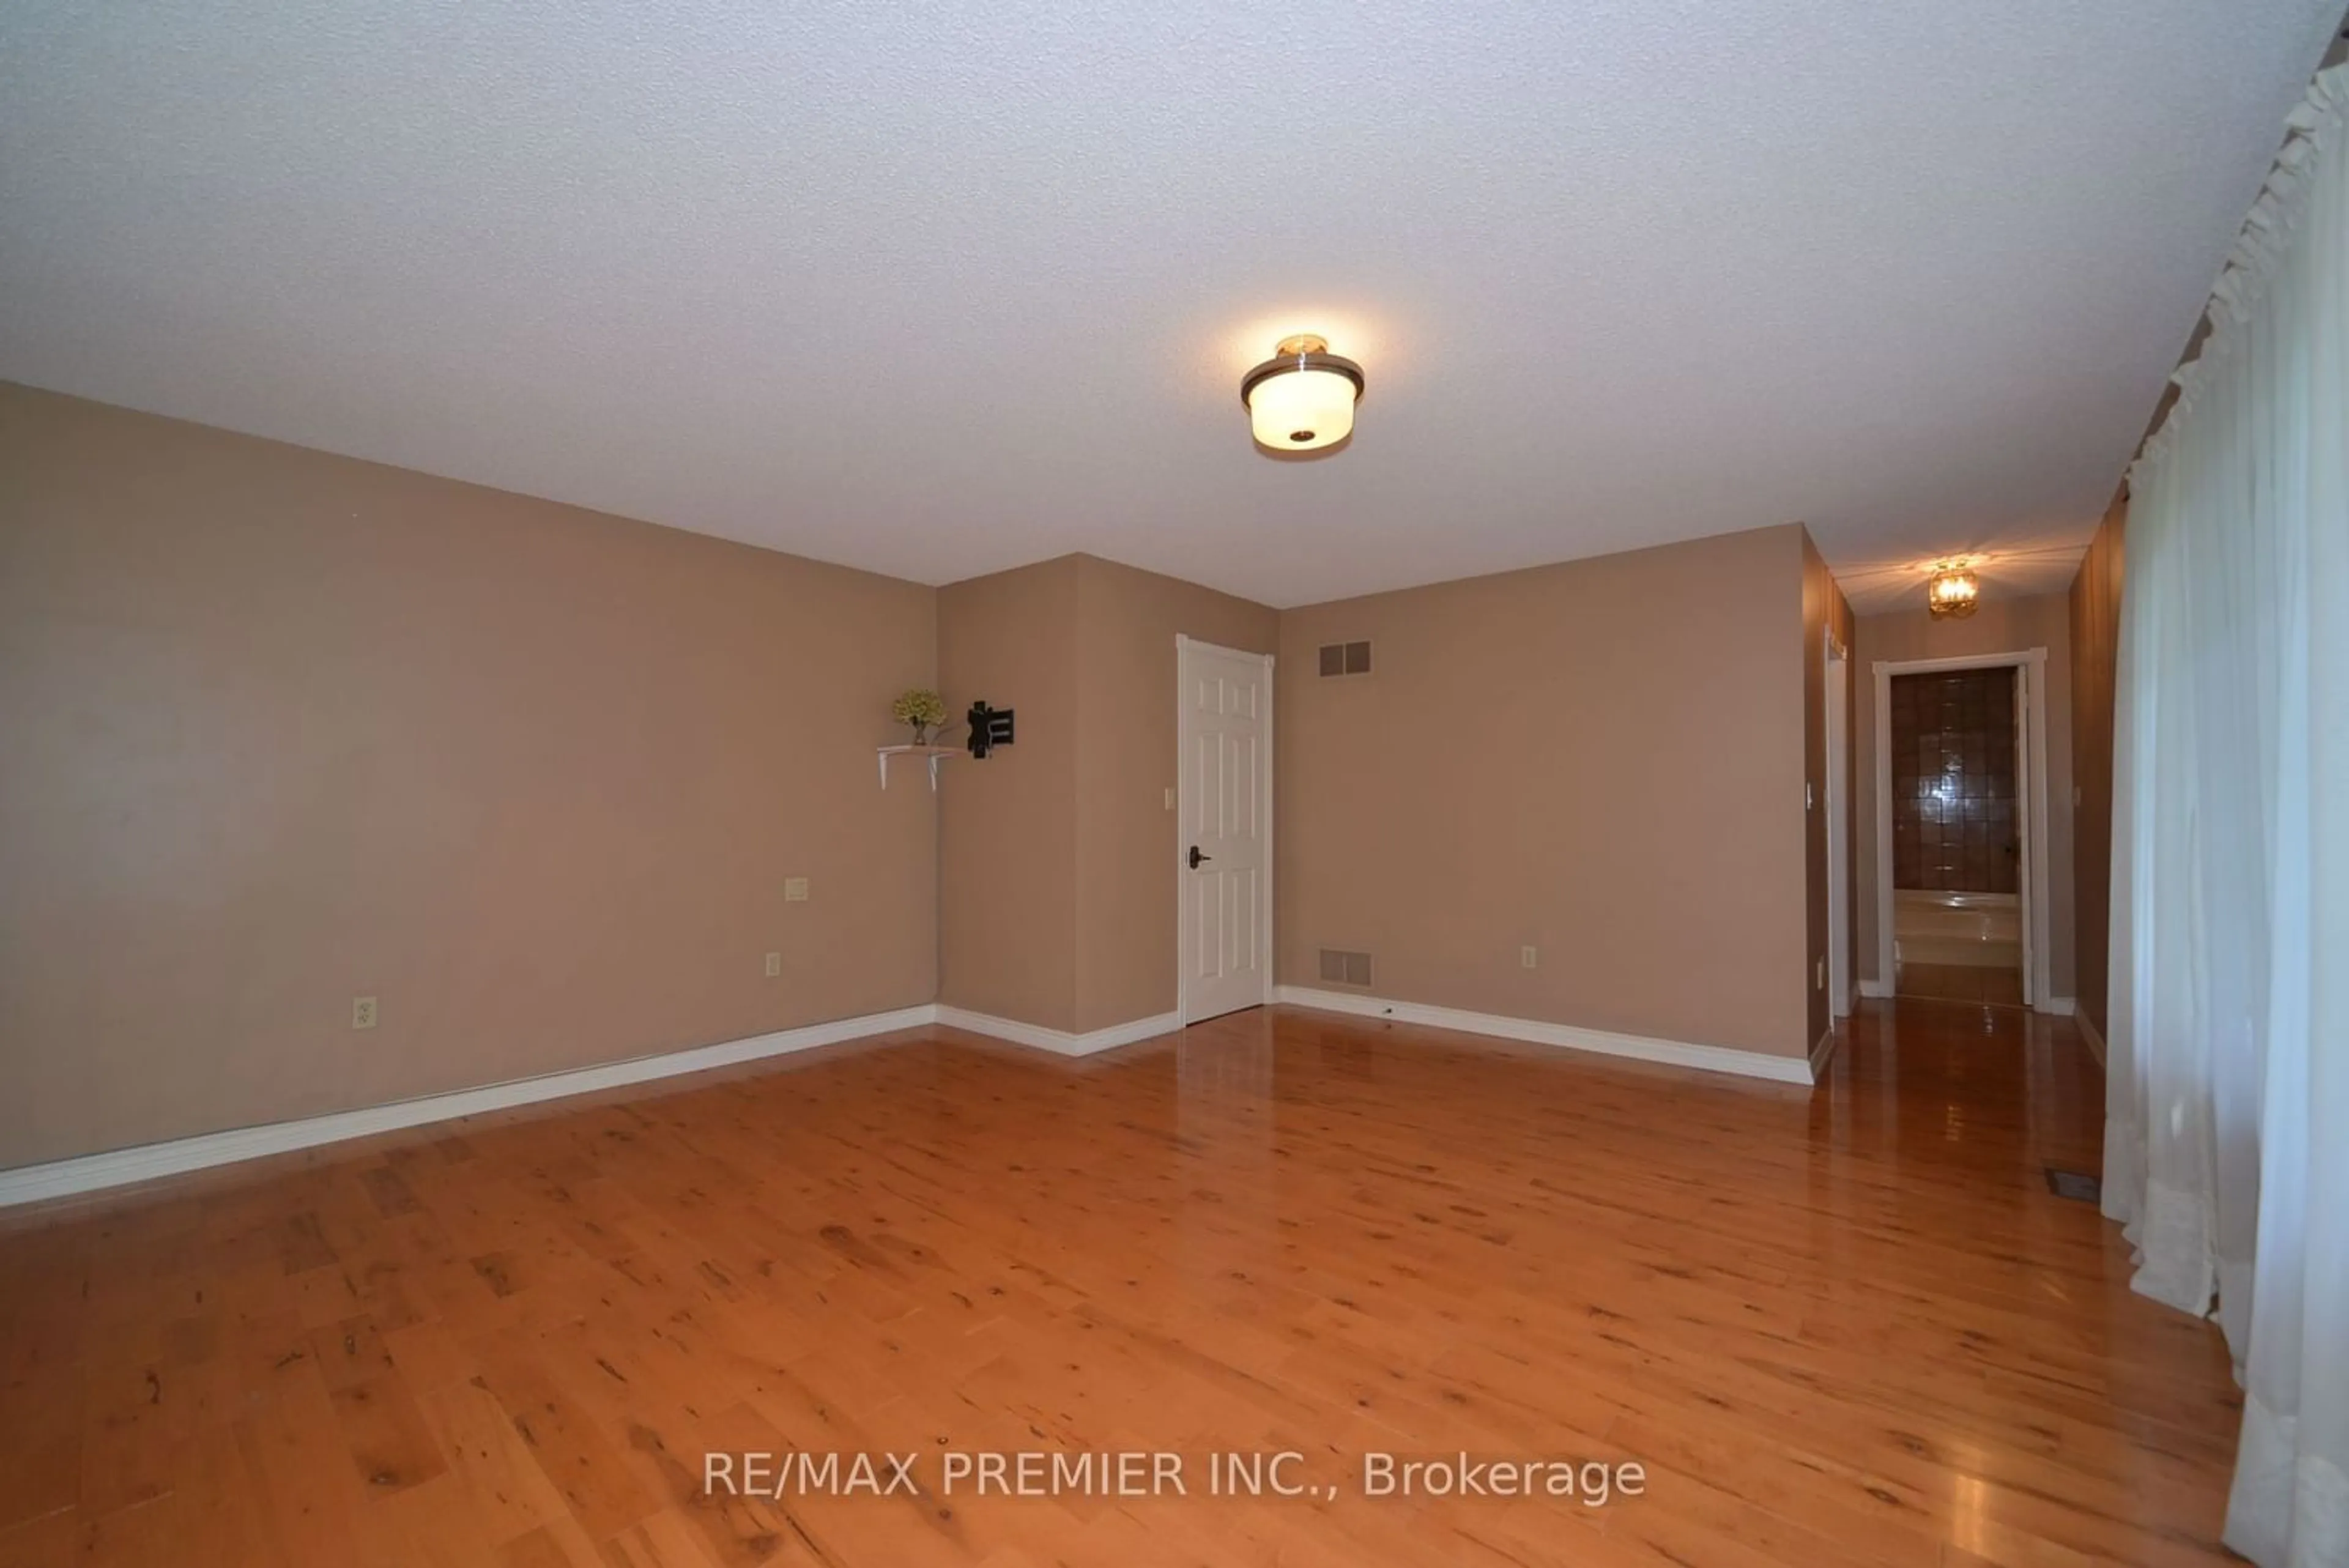 A pic of a room for 12301 Keele St, Vaughan Ontario L6A 2B3